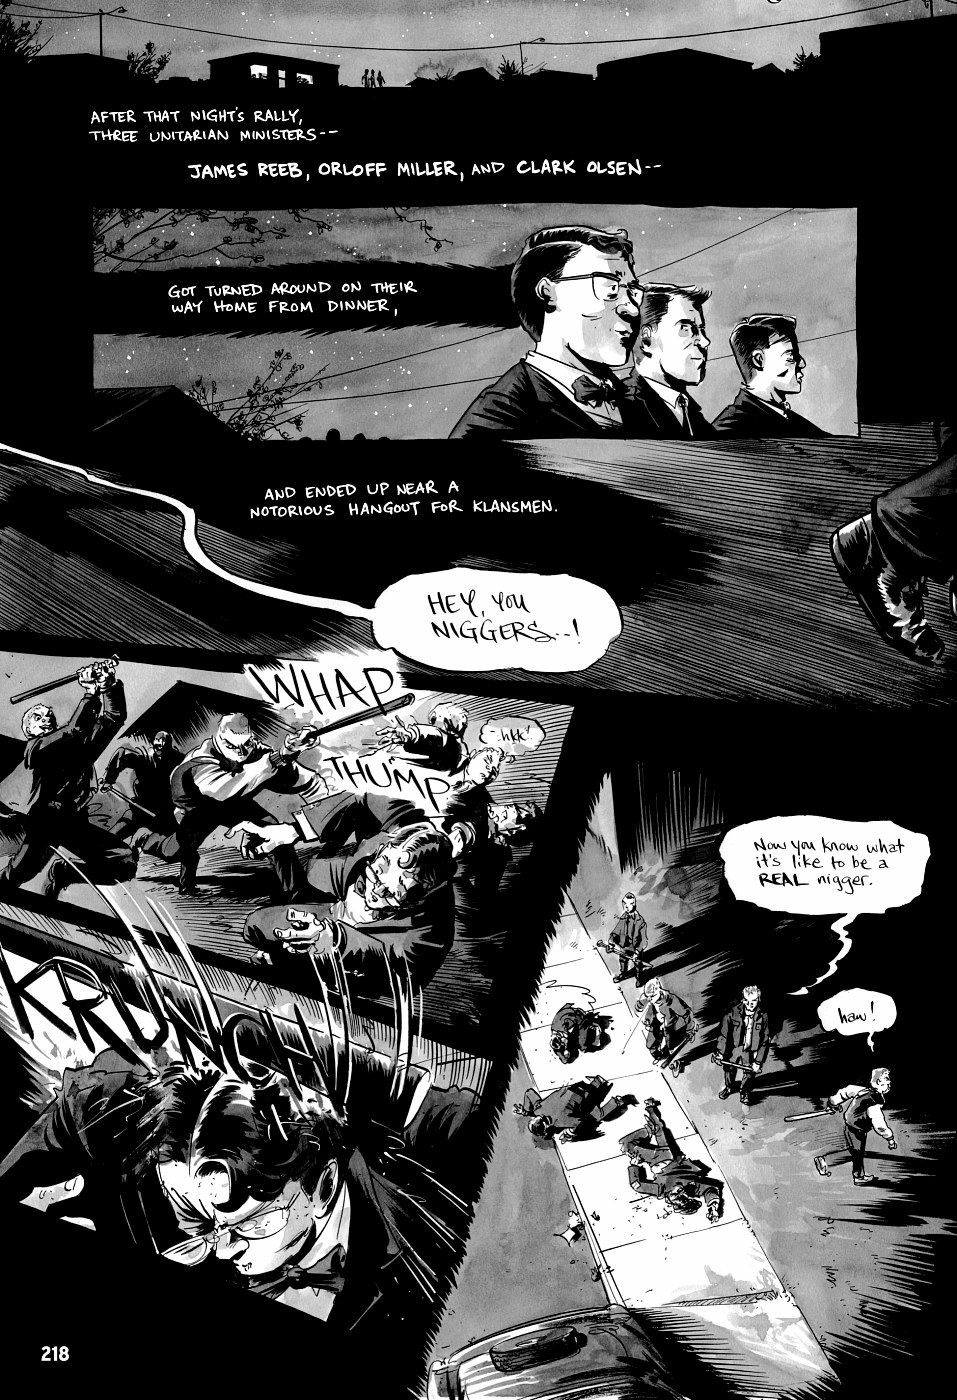 page 218 of march book three graphic novel